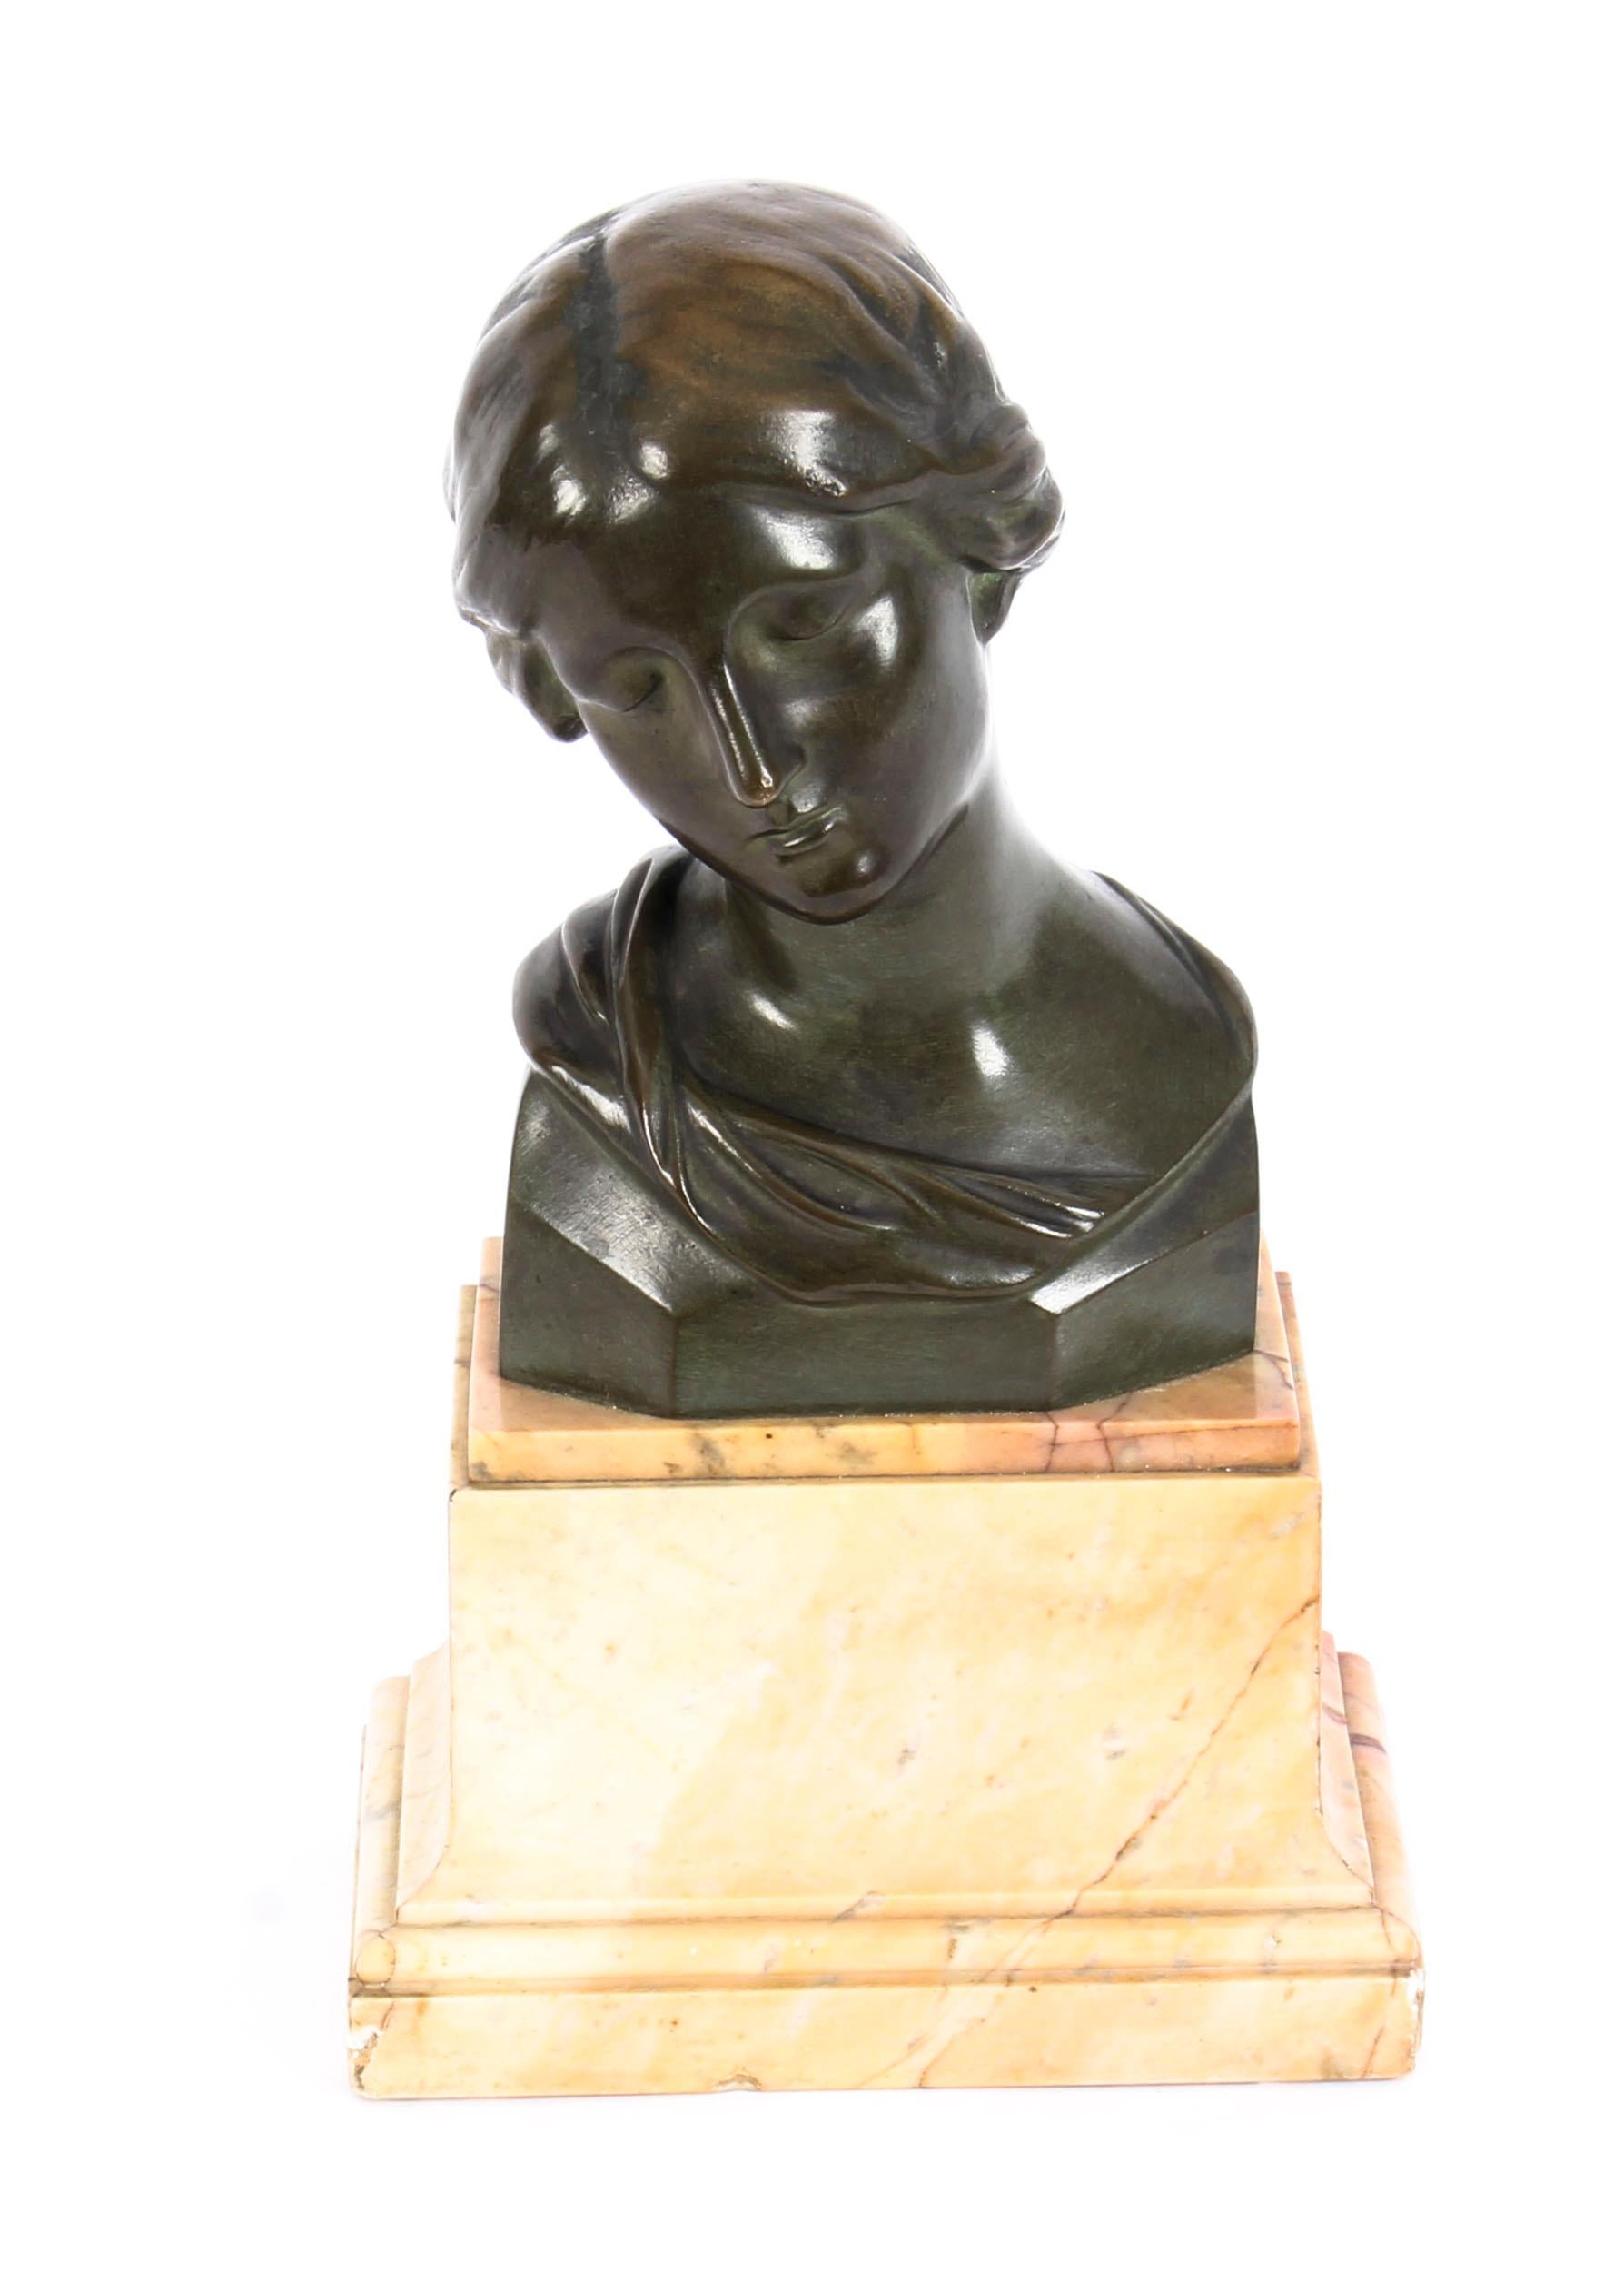 This remarkable dark brown patinated bronze bust is after a sketch of the head of lady by the world-famous Renaissance painter, Raphael, and features a beautiful classical young woman looking downward while being caught in an angelic mood. Her